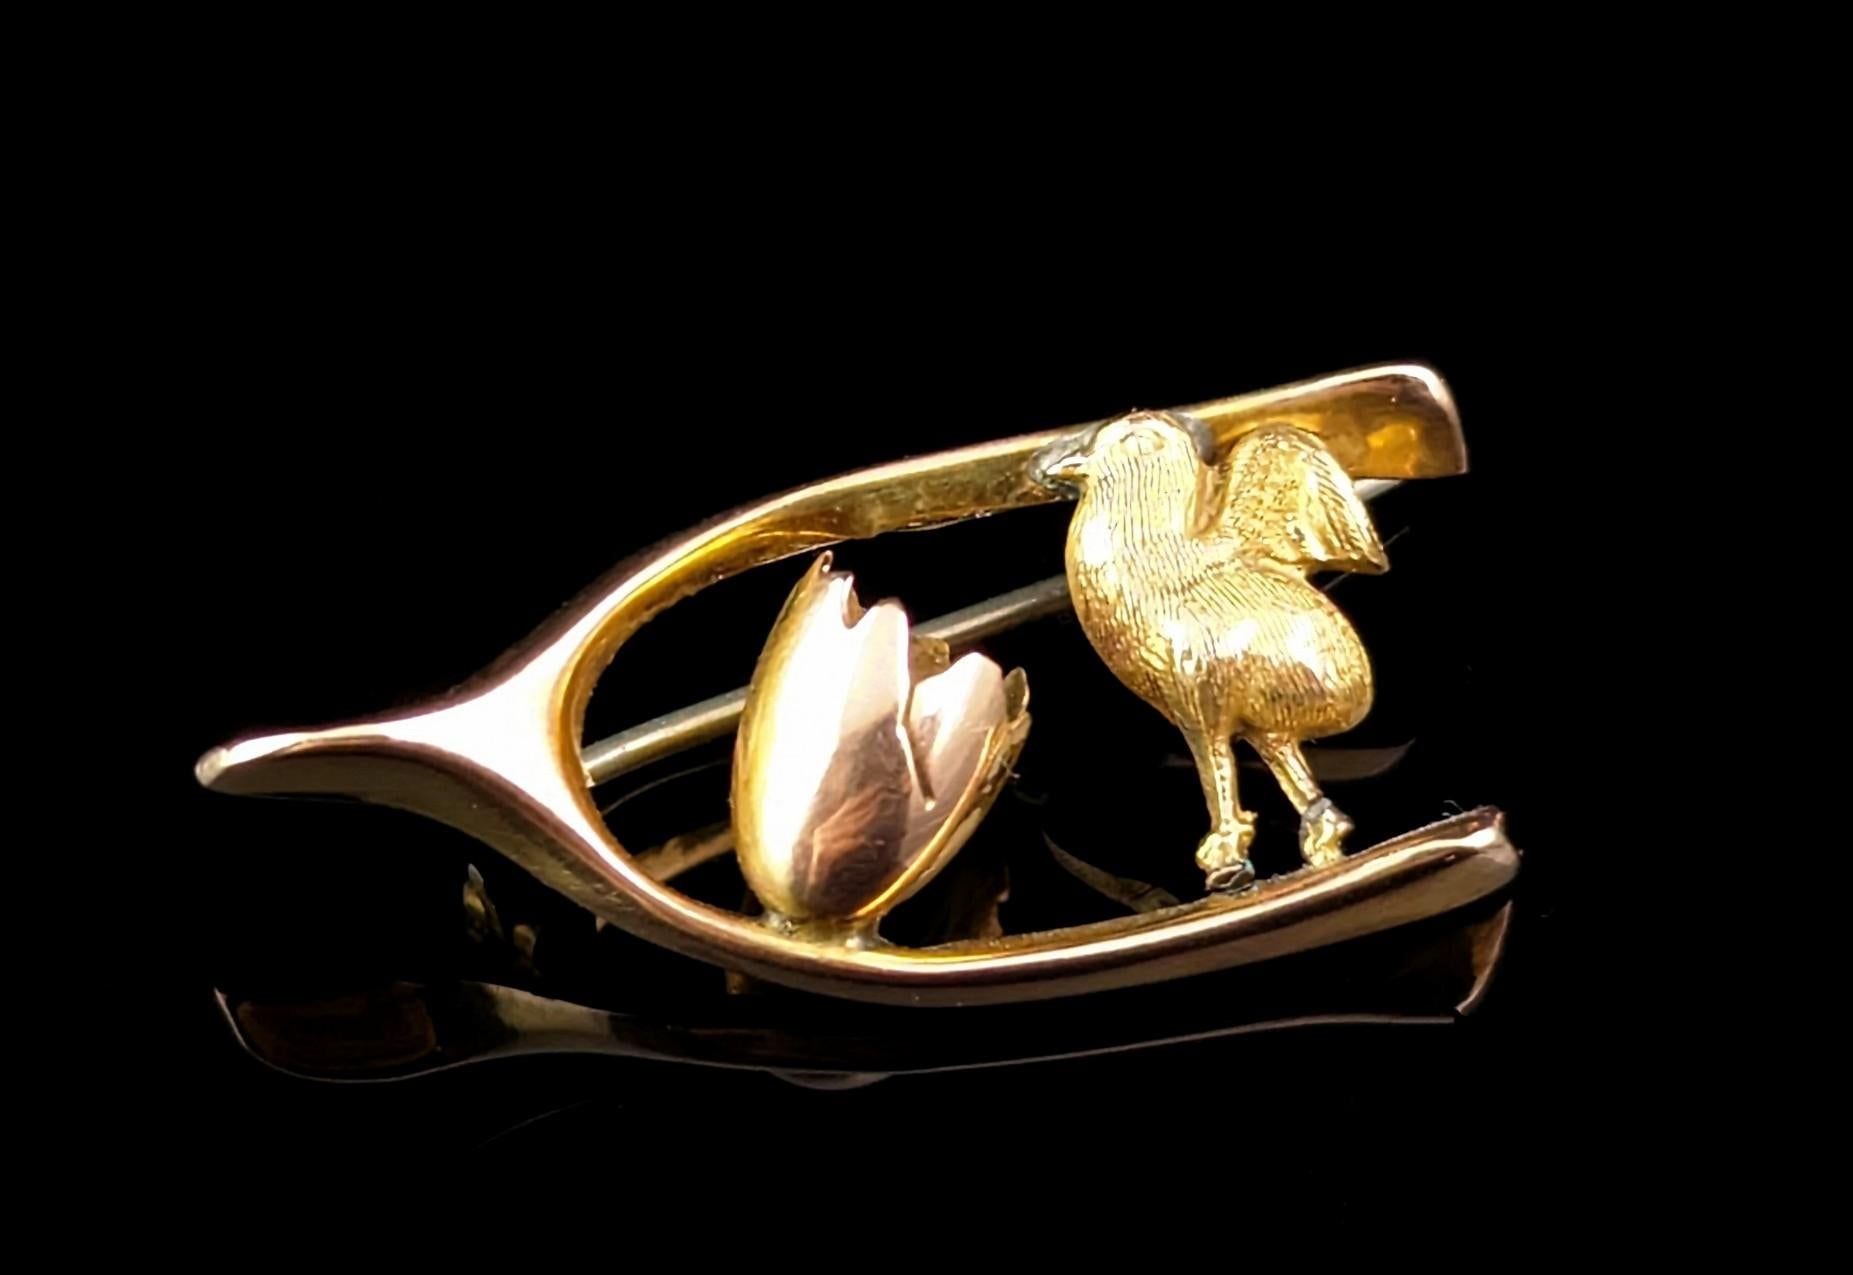 Isn't this dainty antique 9ct gold chick brooch just the sweetest thing?

It features a textured gold chick with half an egg, the chick having emerged from its egg, contained within a lucky wishbone.

Stacked full of Victorian symbolism this small